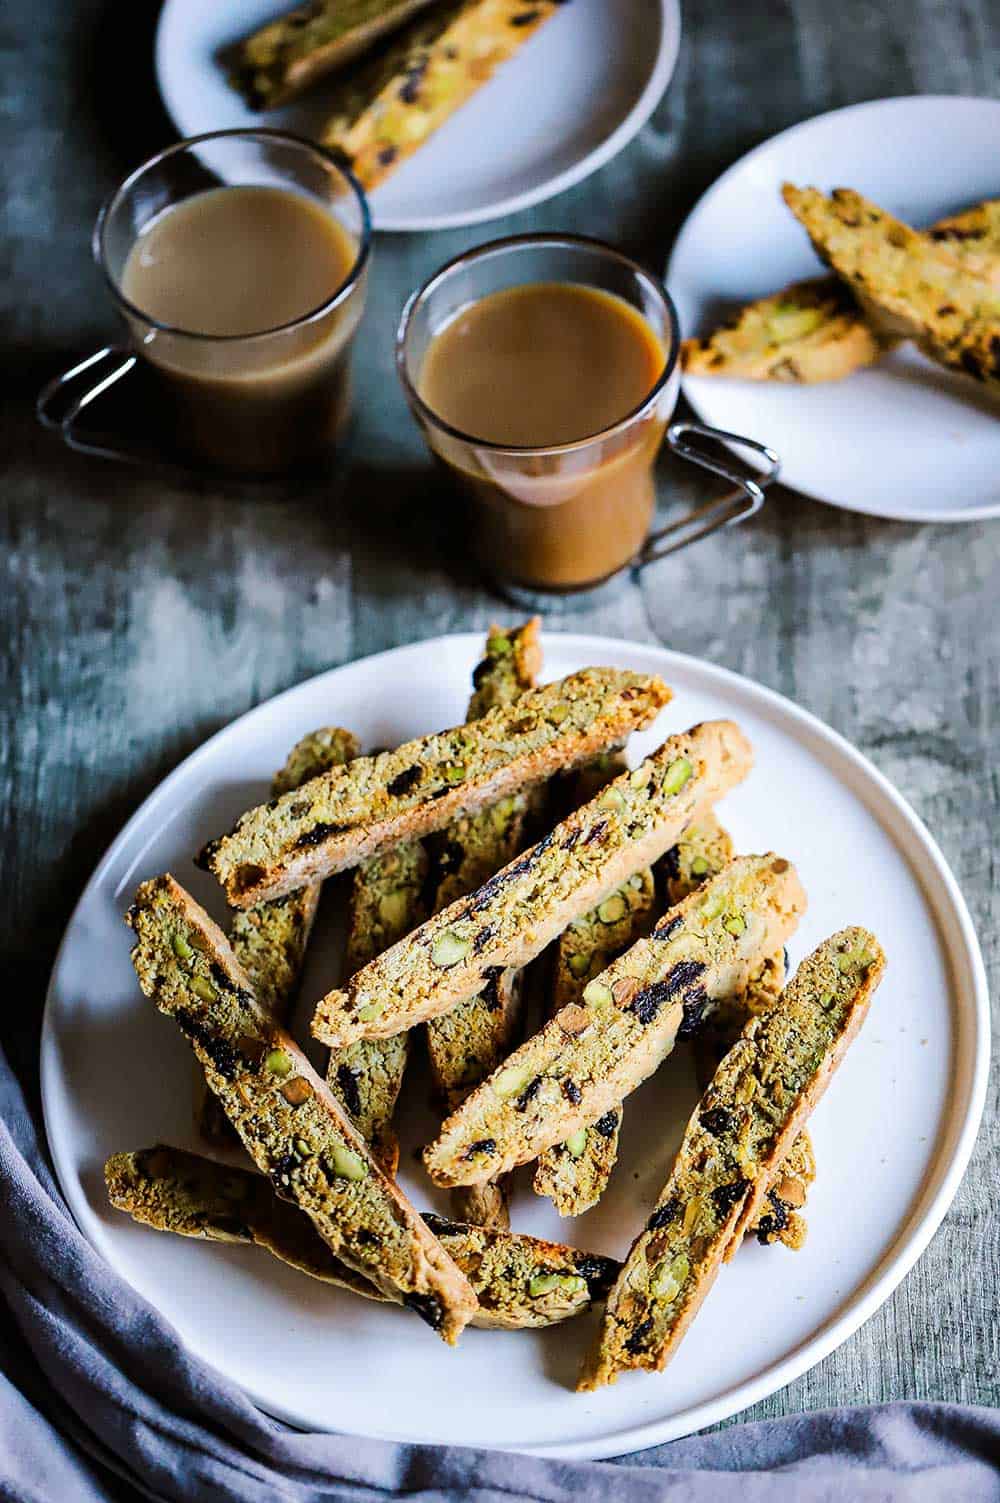 https://howtofeedaloon.com/wp-content/uploads/2022/12/front-view-of-biscotti-with-platrs-an-dcoffee.jpg